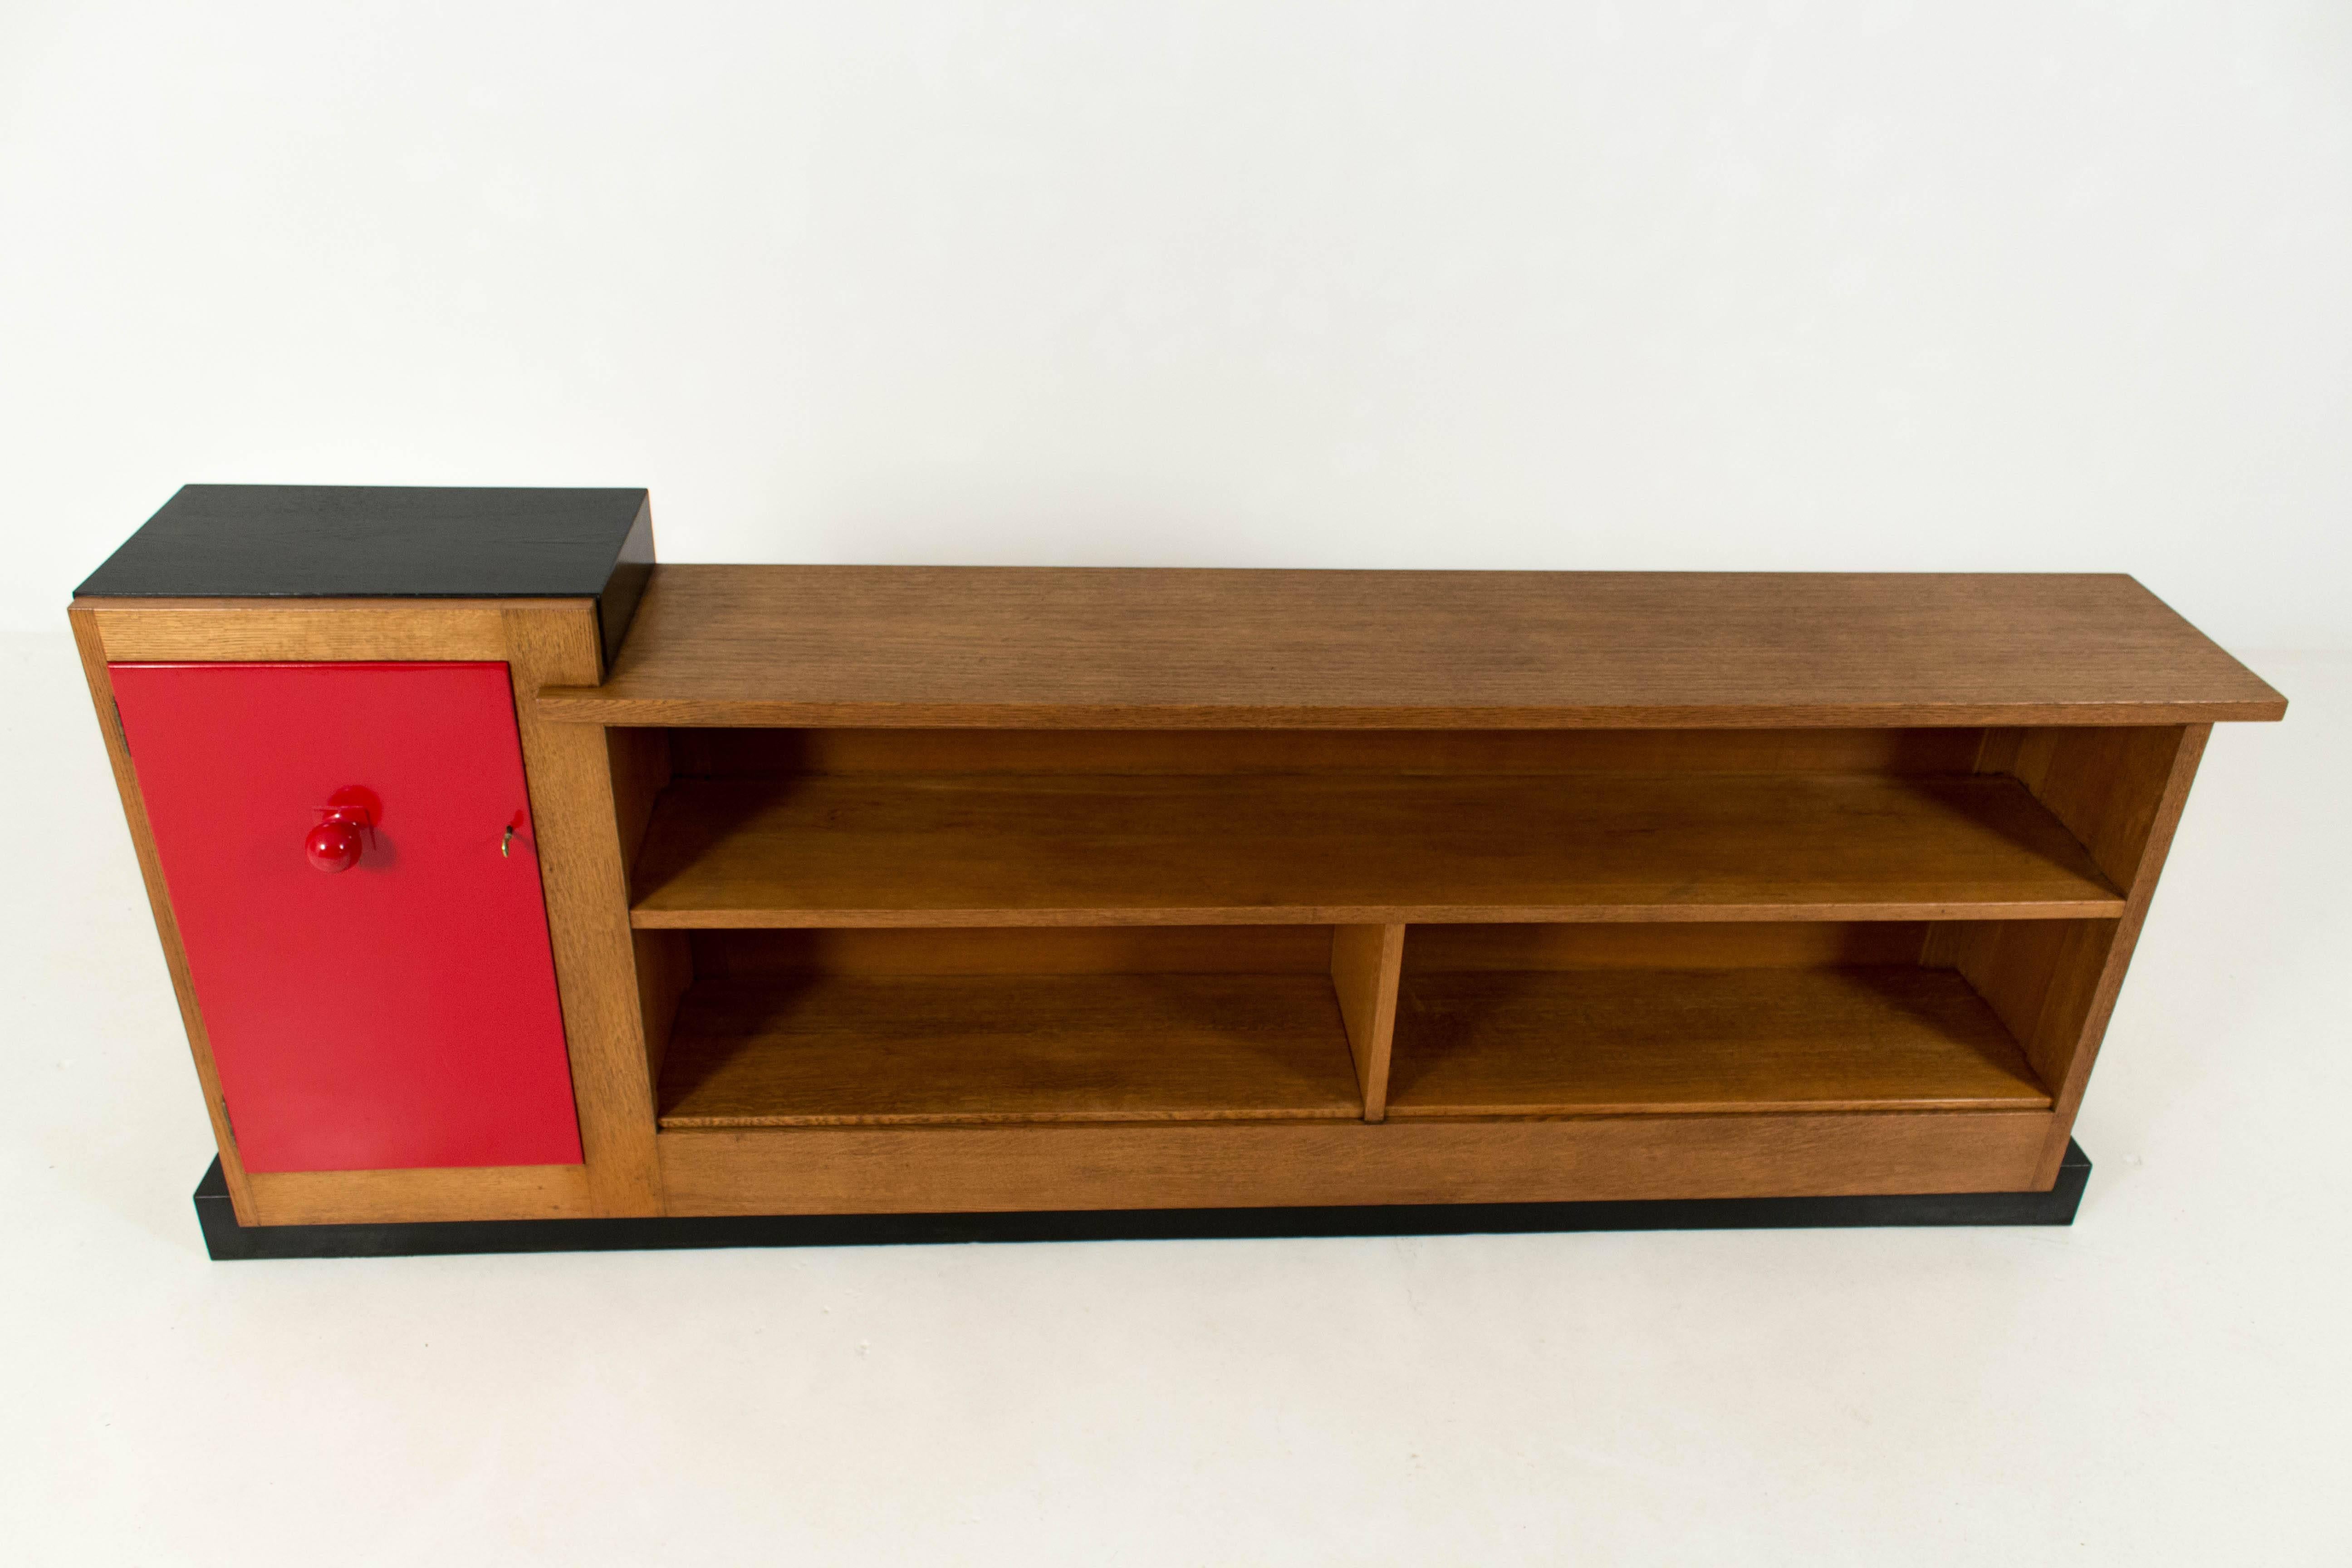 Early 20th Century Important and Rare Art Deco Haagse School Sideboard by Henk Wouda for Pander